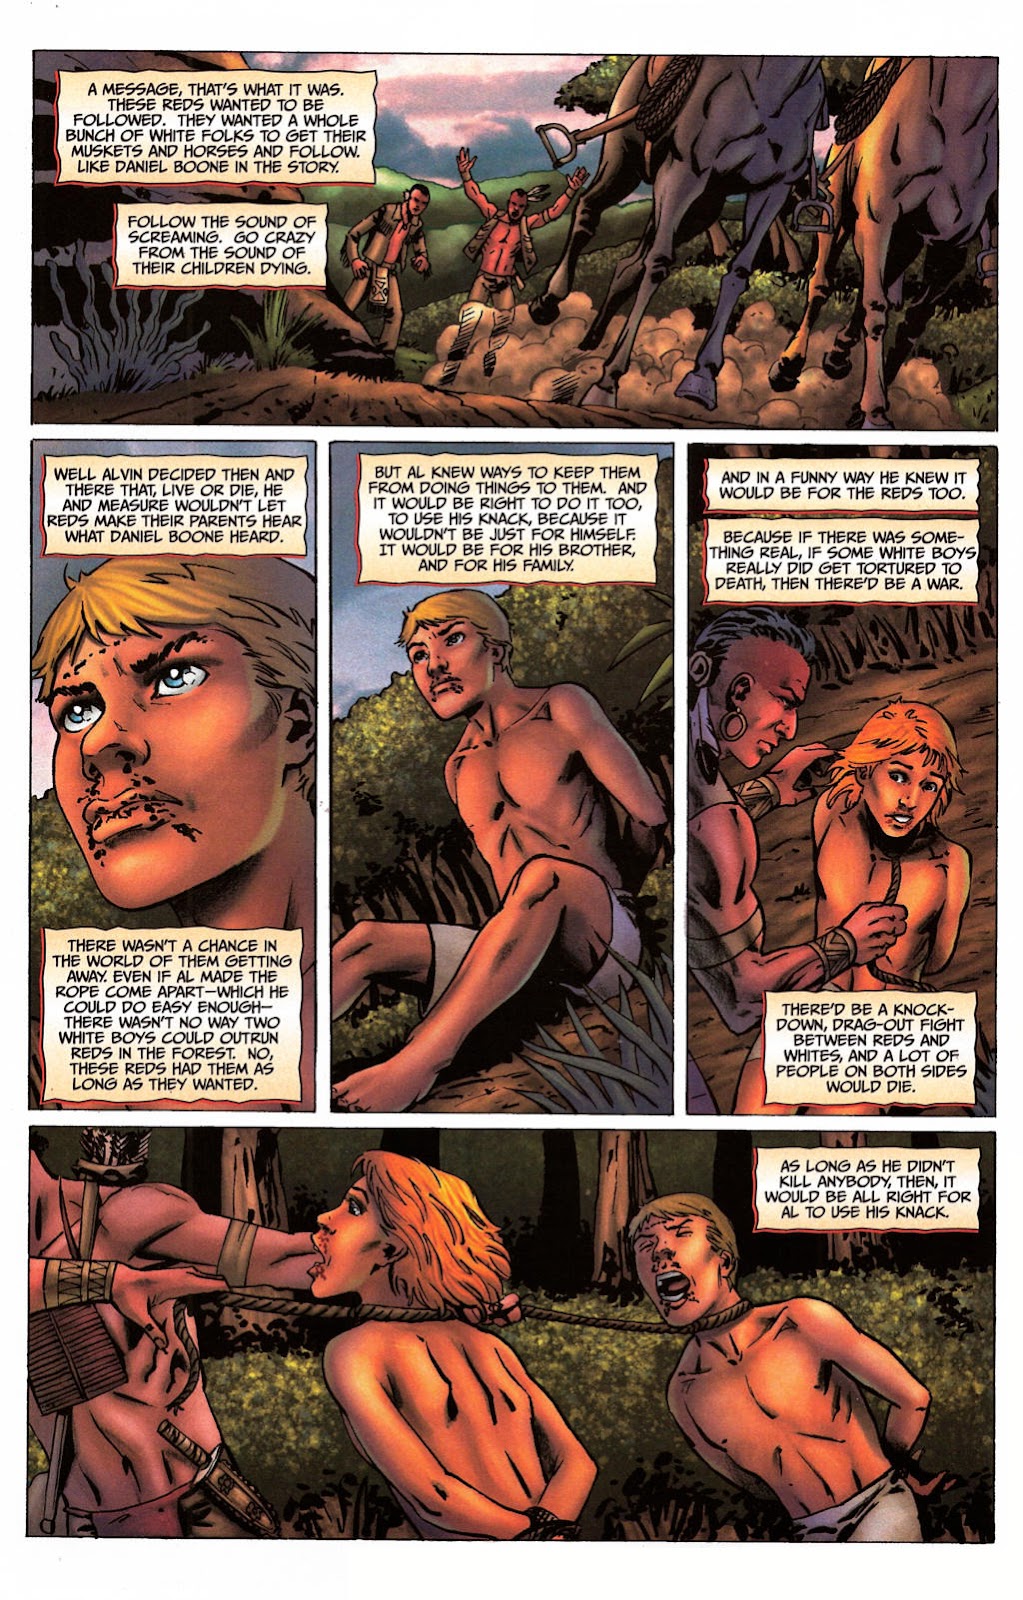 Red Prophet: The Tales of Alvin Maker issue 5 - Page 8